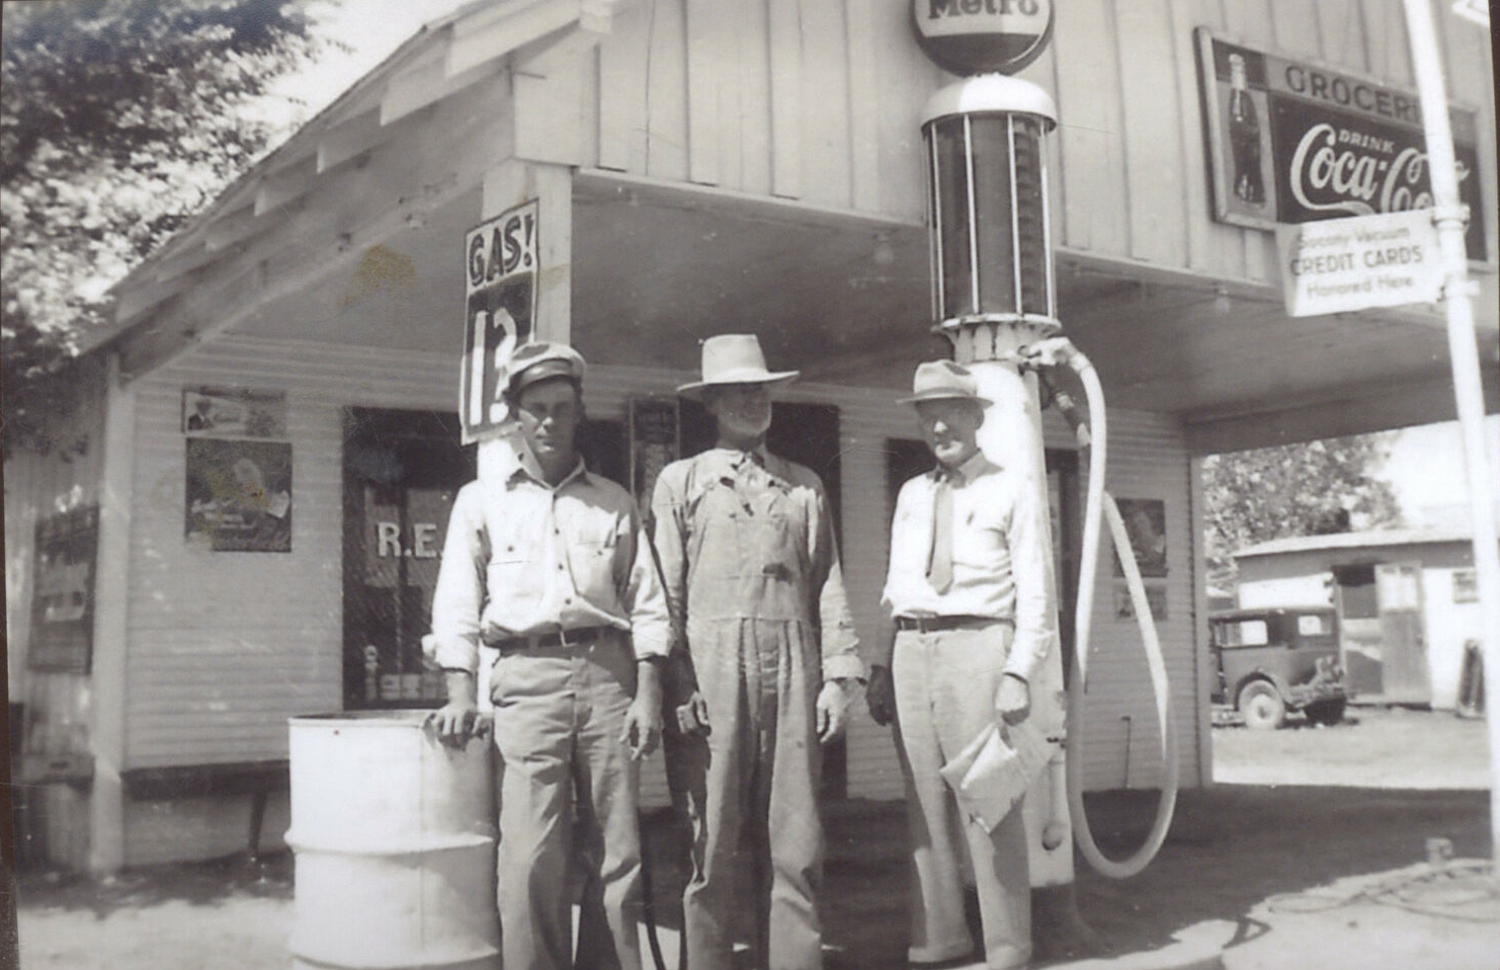 Harvey's Gas Station in New Deal in the 1930s